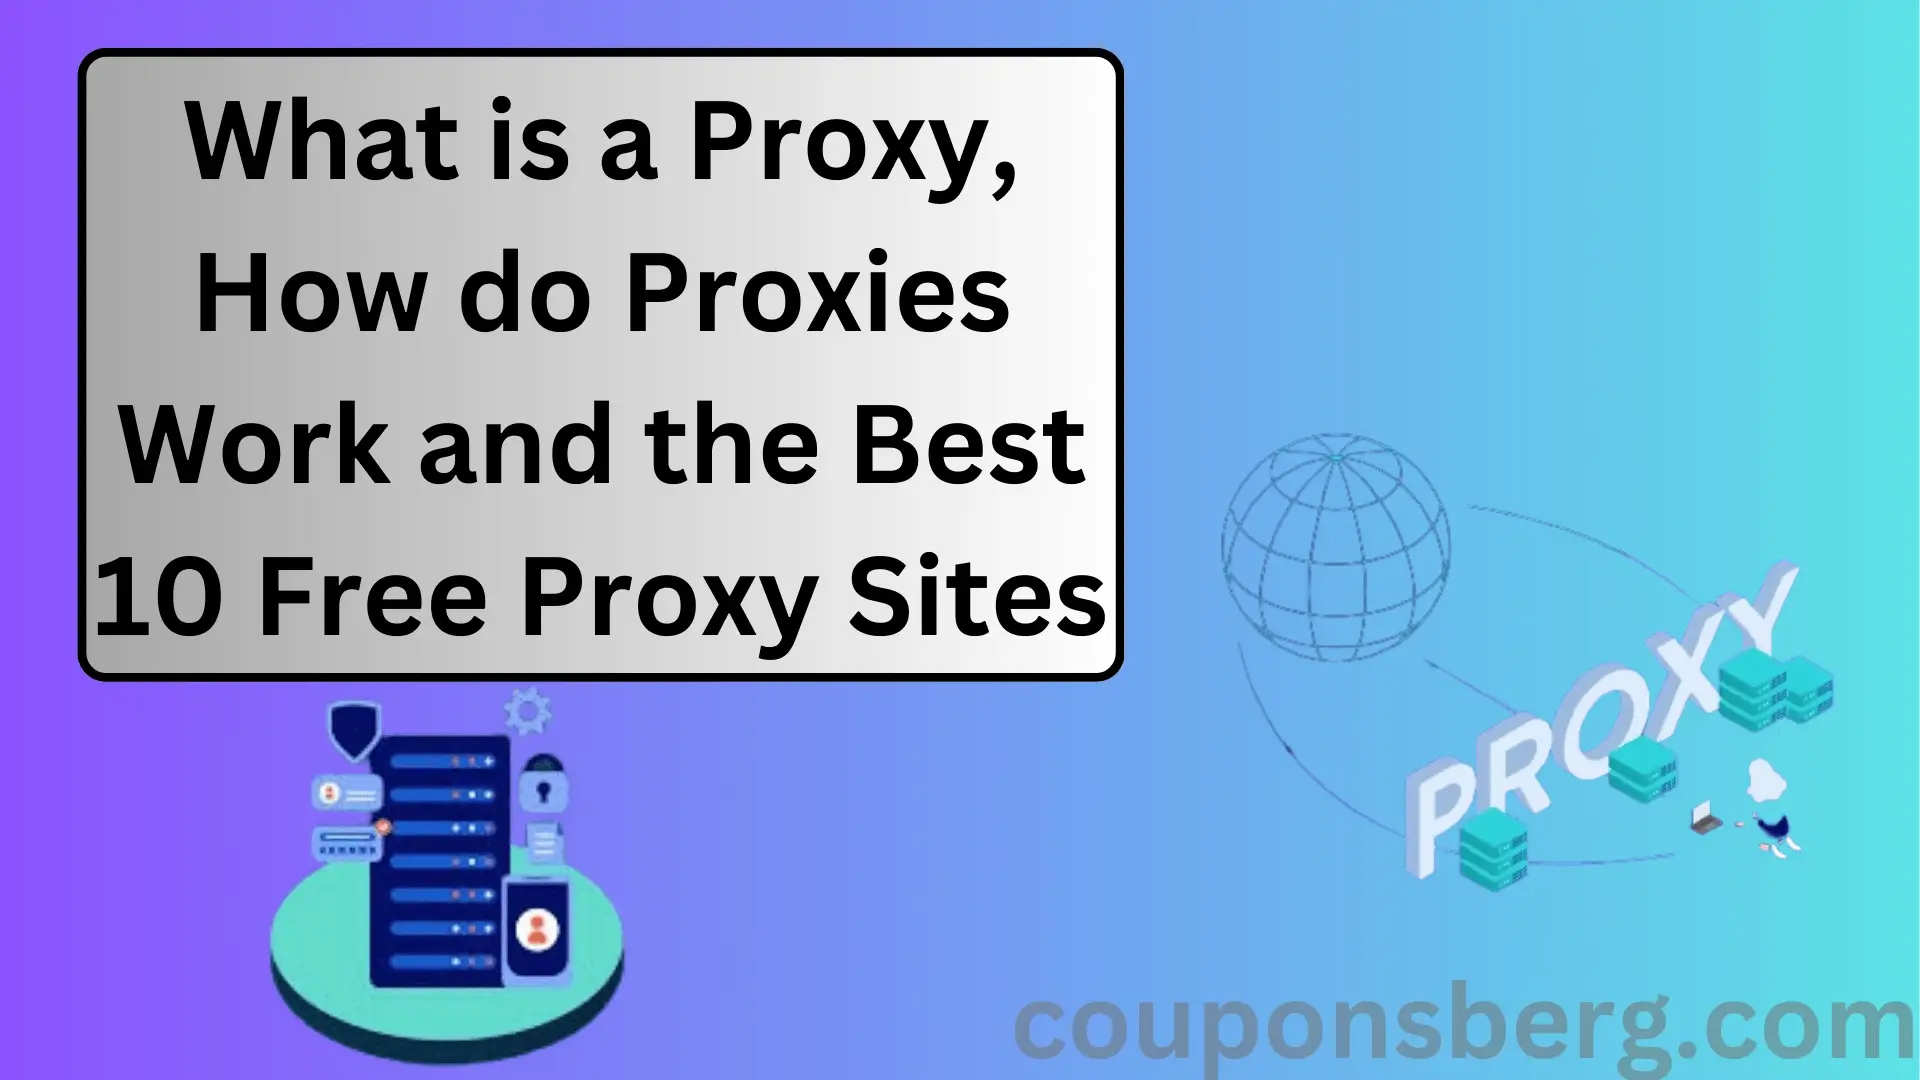 What is a Proxy, How do Proxies Work and the Best 10 Free Proxy Sites